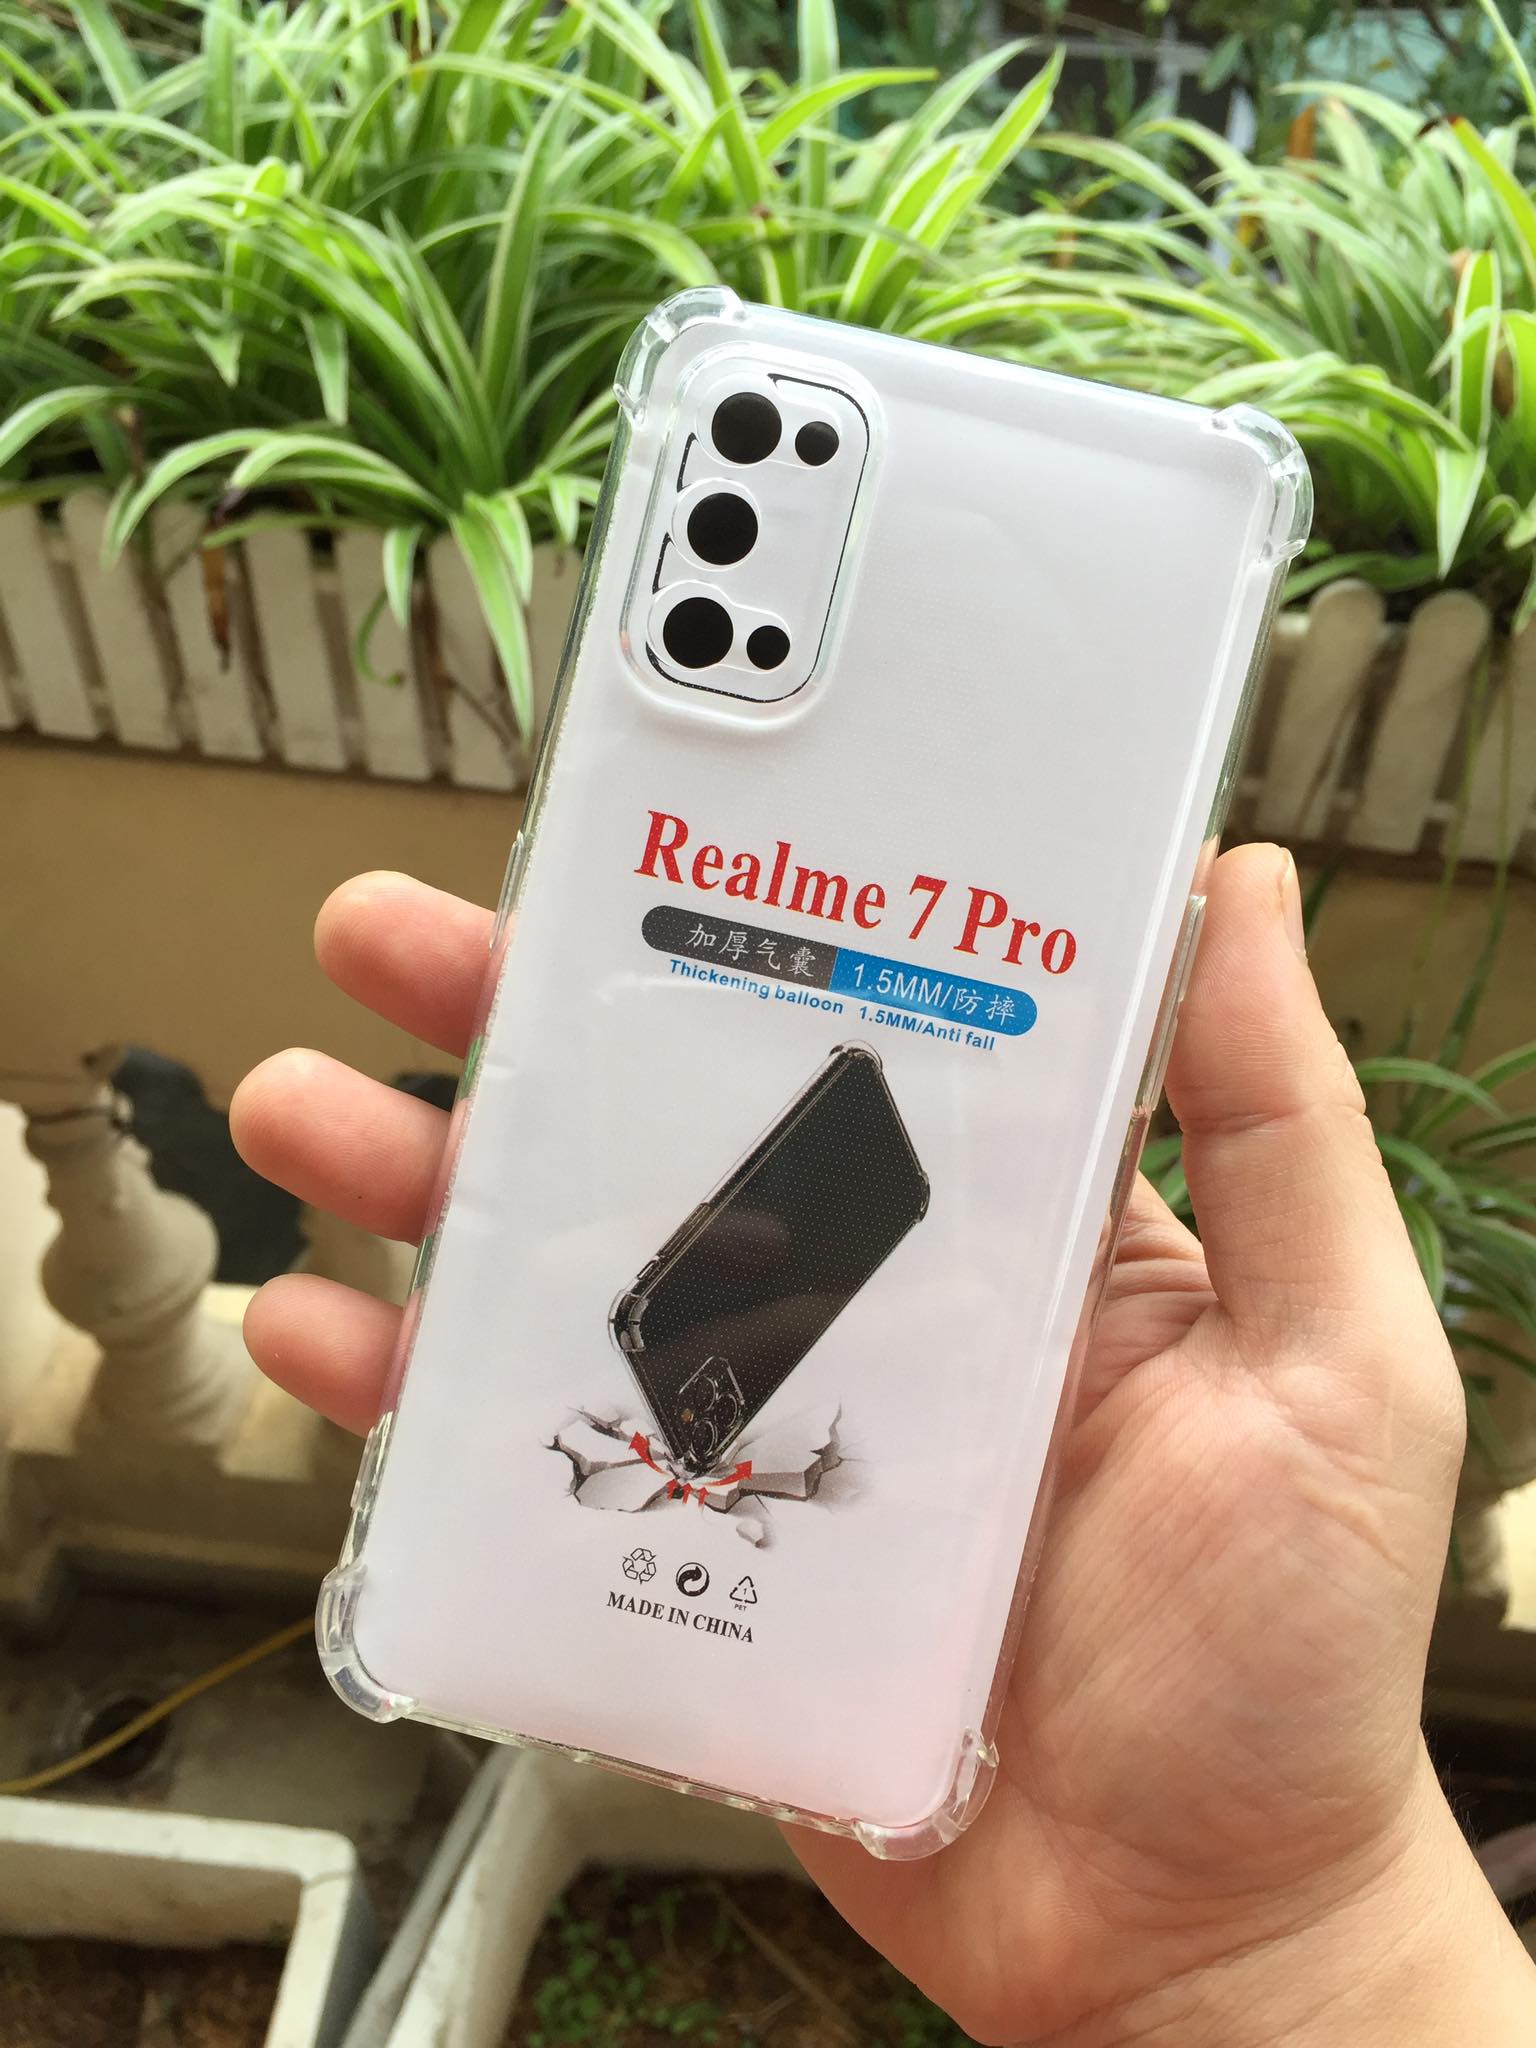 Ốp lưng silicon cho Oppo Realme 7 Pro - chống sốc gờ cao 4 góc trong suốt